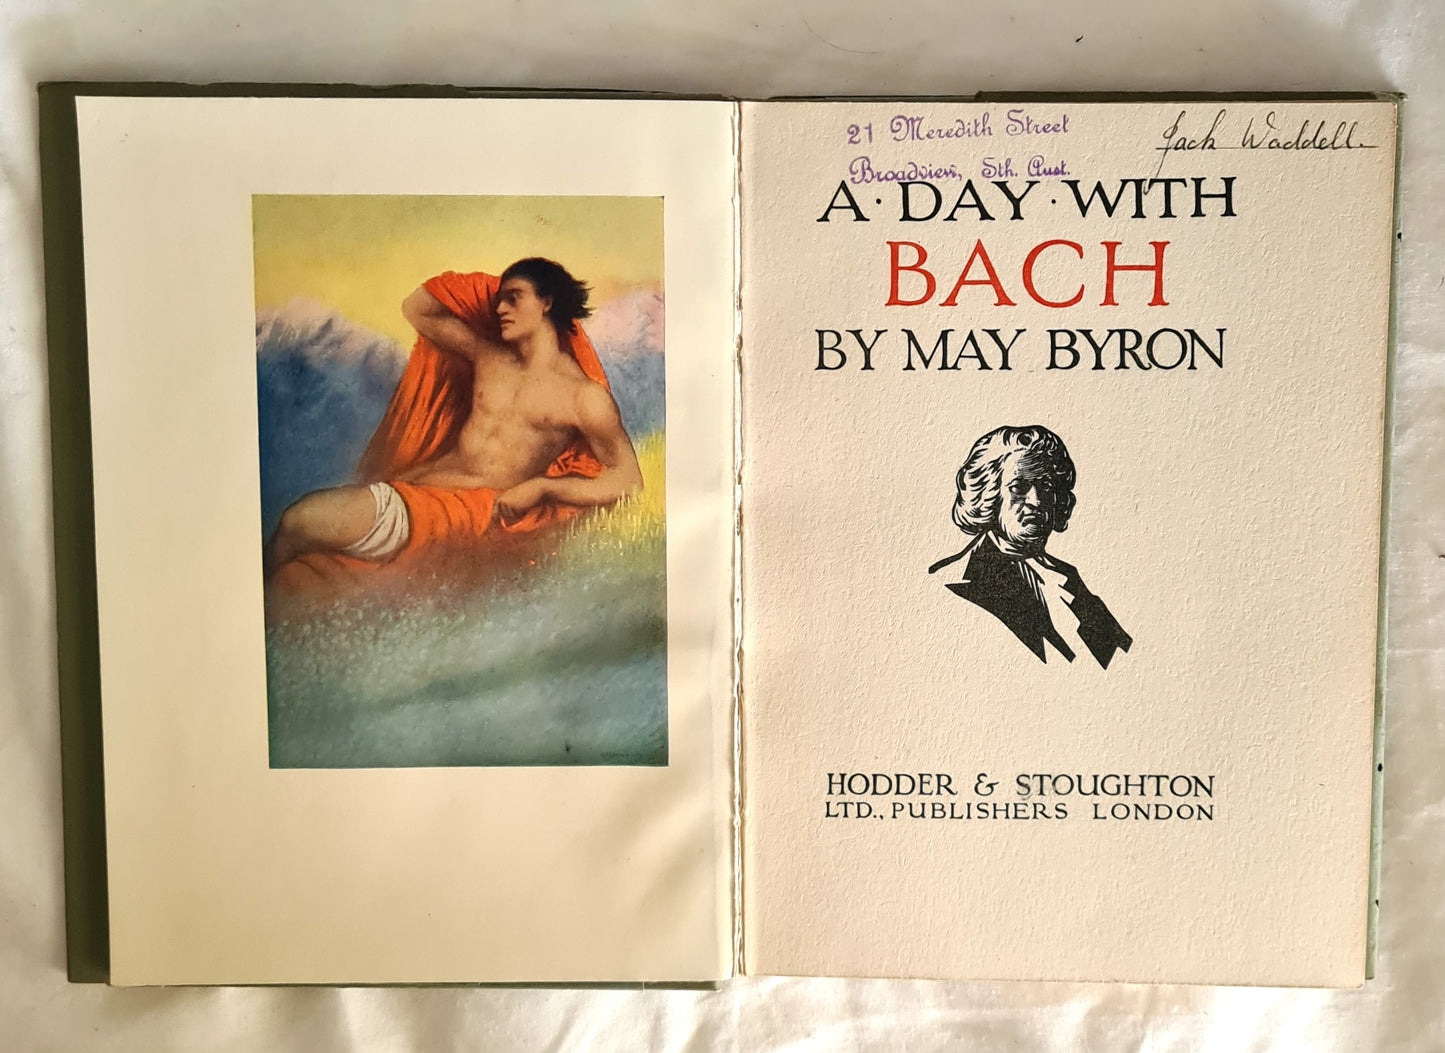 A Day With Bach by May Byron